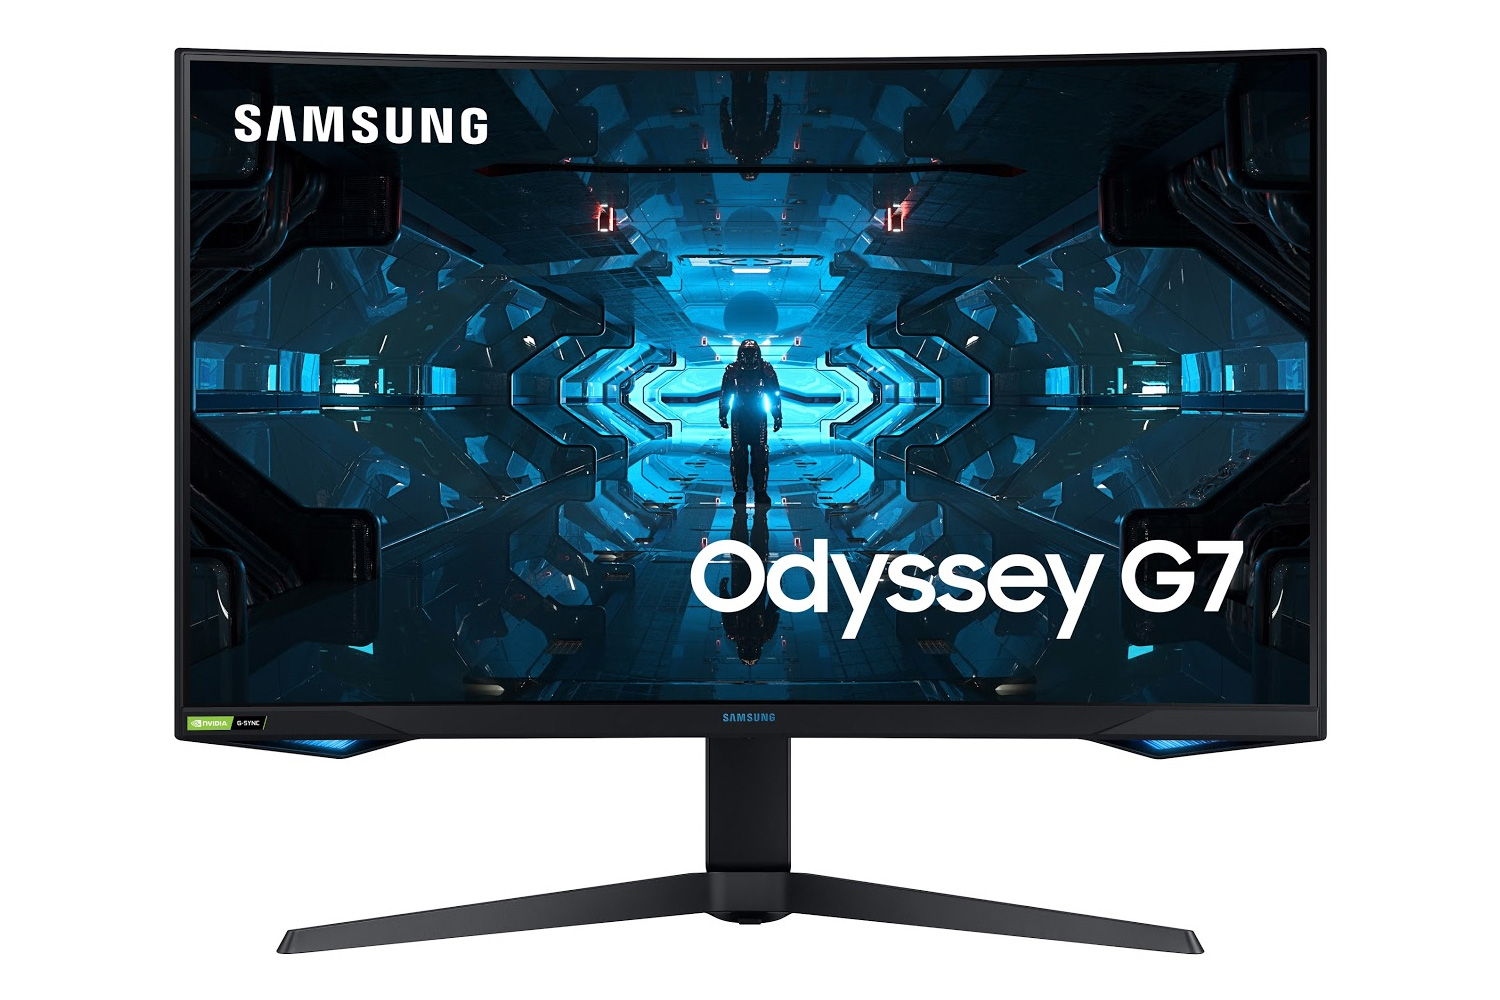 Samsung Malaysia Released Odyssey G7 Gaming Monitor